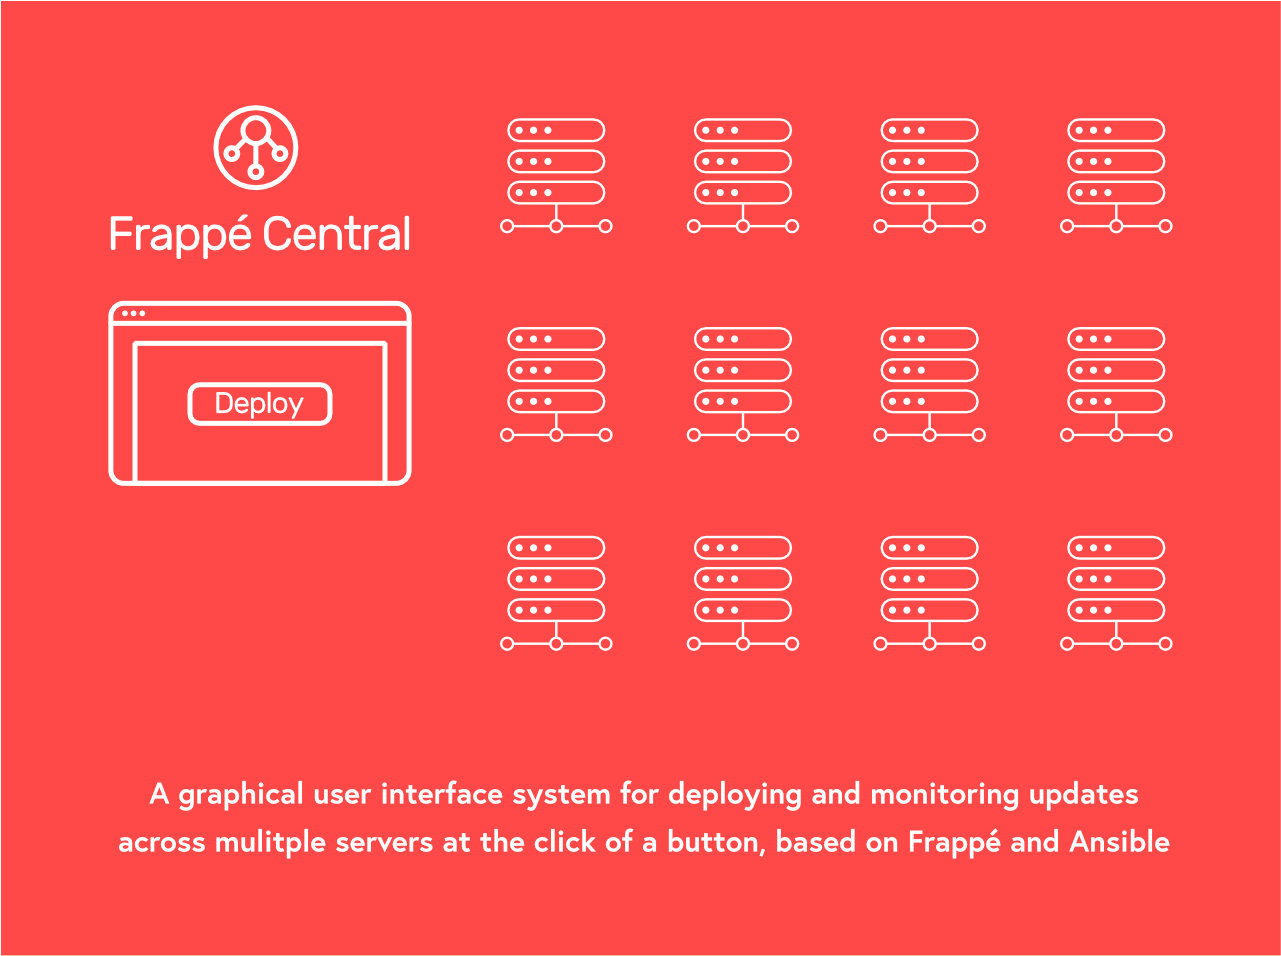 Frappé Central: a graphical user interface system for deploying and monitoring updates across multiple servers at the click of a button, based on Frappé and Ansible